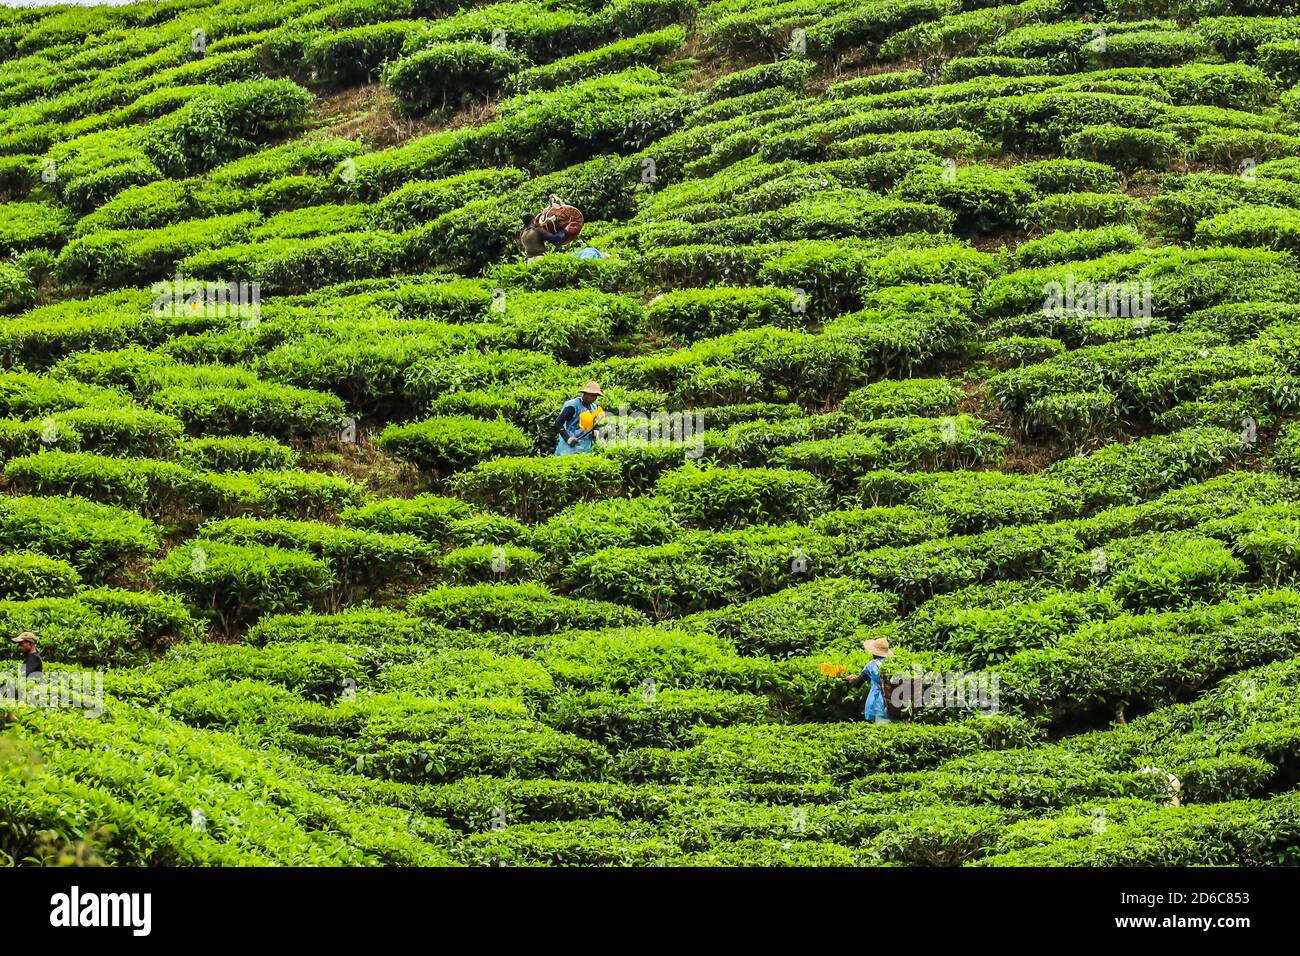 Plantation workers plucking tea leaves in a tea plantation in Malaysia, using cutters instead of the traditional way of picking leaves by hand. Stock Photo